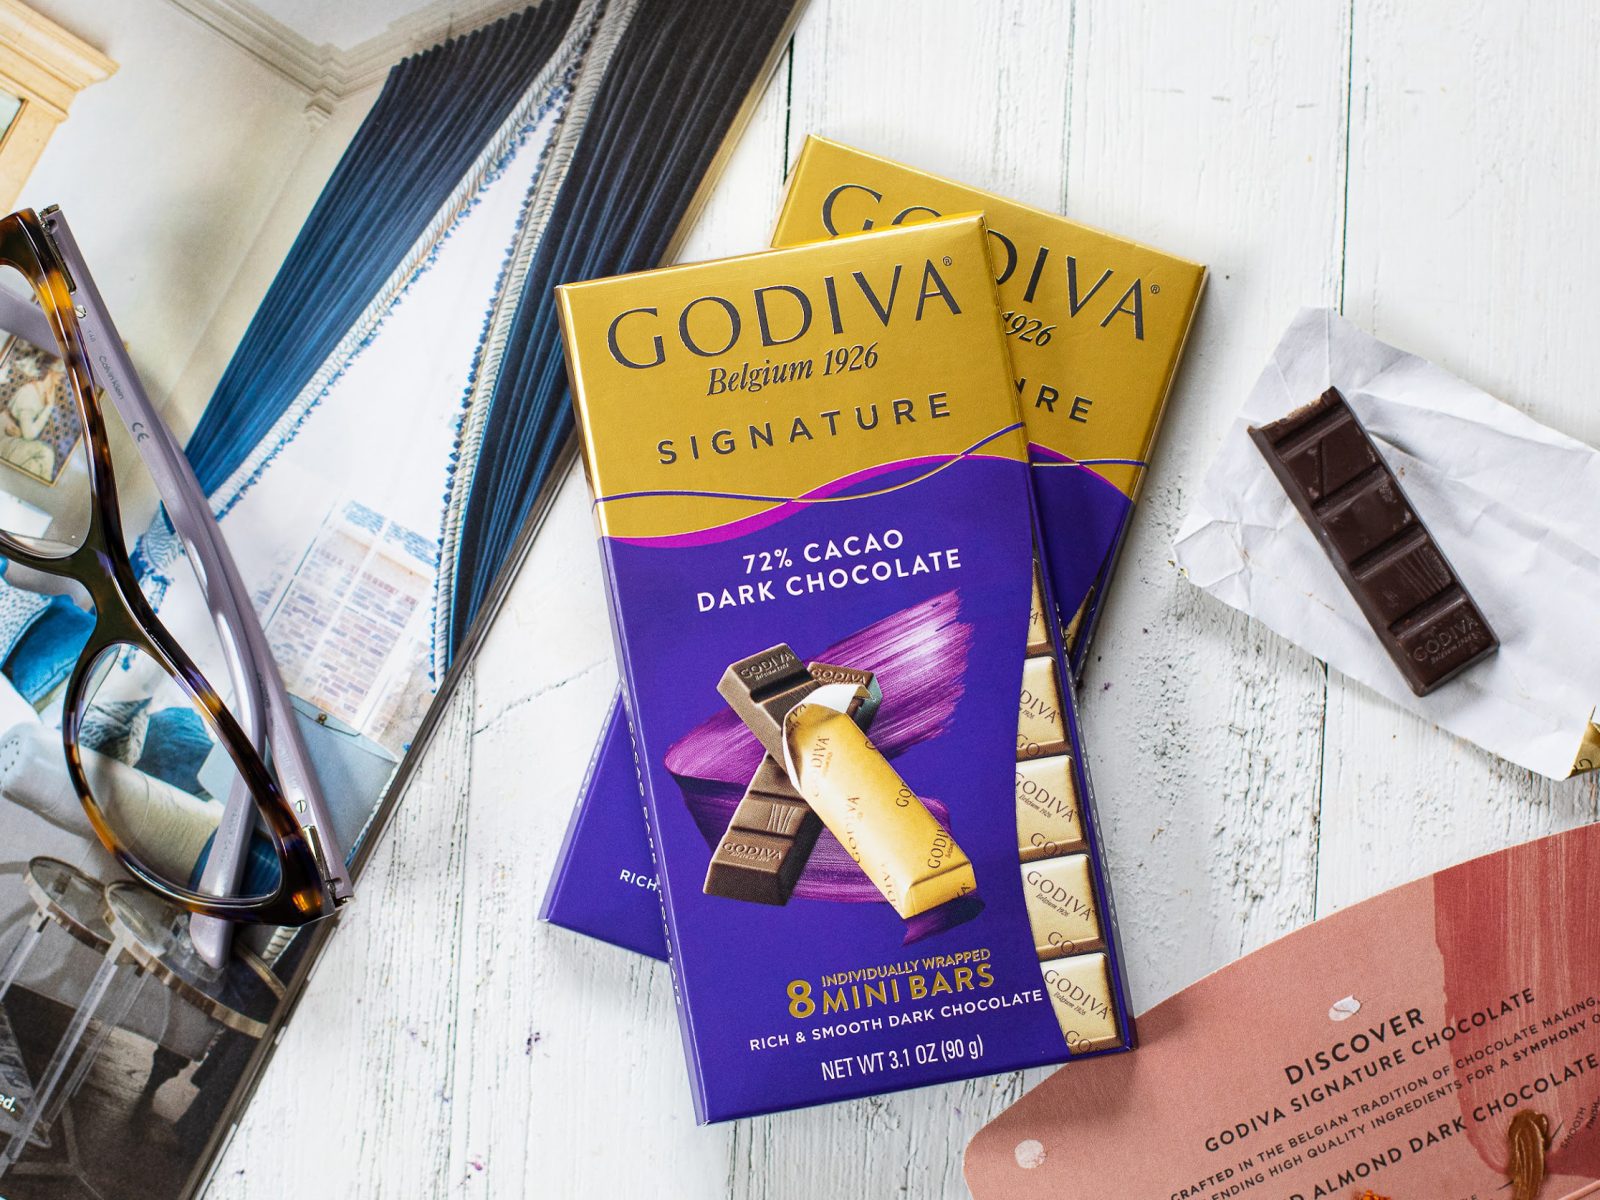 Score A Great Deal On GODIVA Chocolate Bars At Kroger – Just $1.75 Each